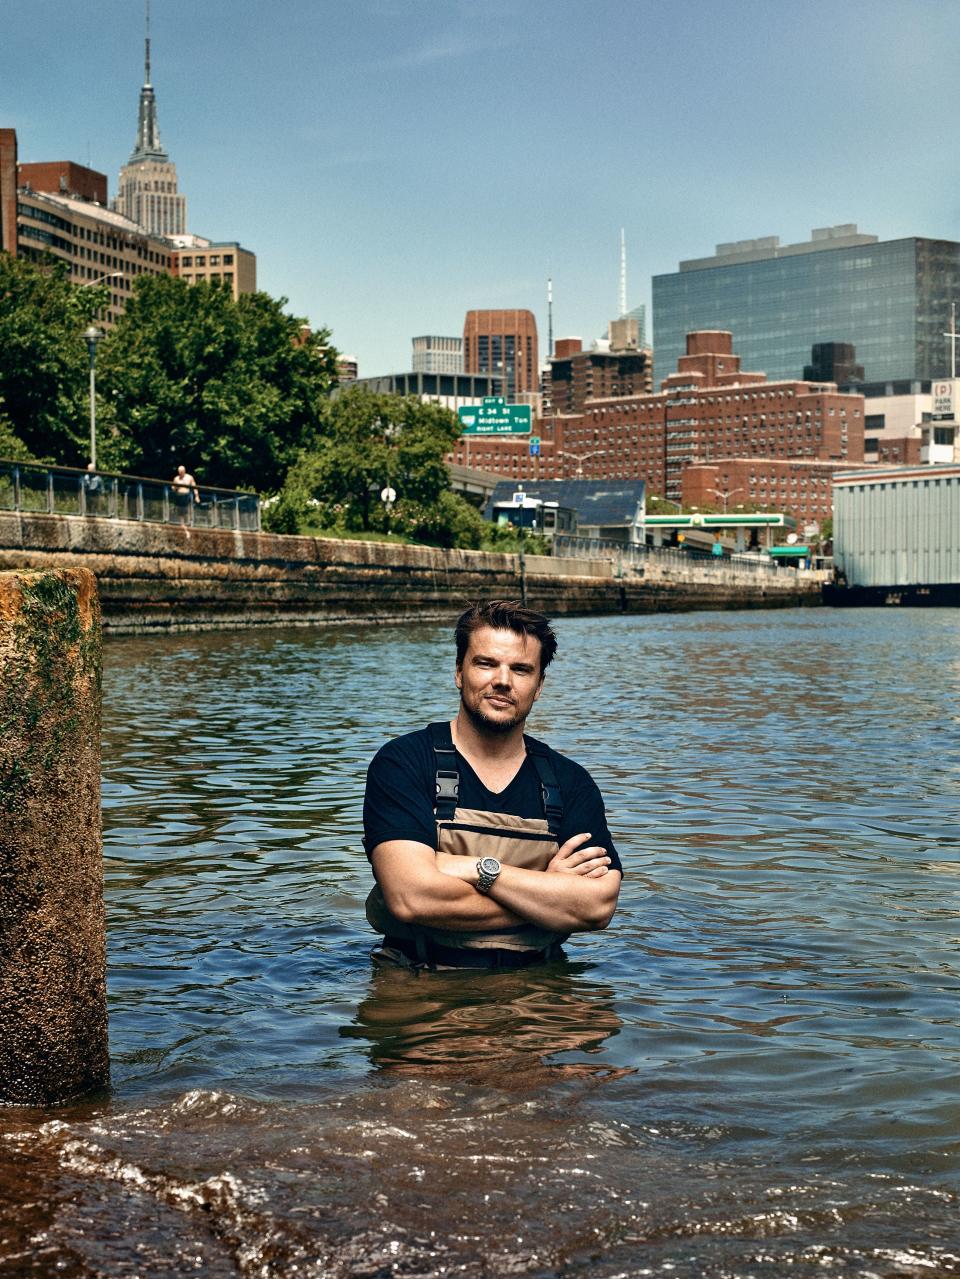 <strong><em>BIG–Bjarke Ingels Group—dryline</em></strong> Charged with protecting ten miles of Manhattan’s waterfront in the aftermath of Hurricane Sandy, AD100 architect Ingels (right) has envisioned a ribbon of community and cultural spaces that would both engage the public and withstand future floods. Nicknamed the Dryline, his forthcoming park—winner of the local Rebuild by Design competition—will combine a raised landscape of protective berms and resilient plants with re­creational features such as skate parks, undulating double benches, and winding bicycle paths. In the event of rising waters, art walls deploy as shutters, serving as an emergency barrier. Rain or shine, the Dryline promises to do the city proud.